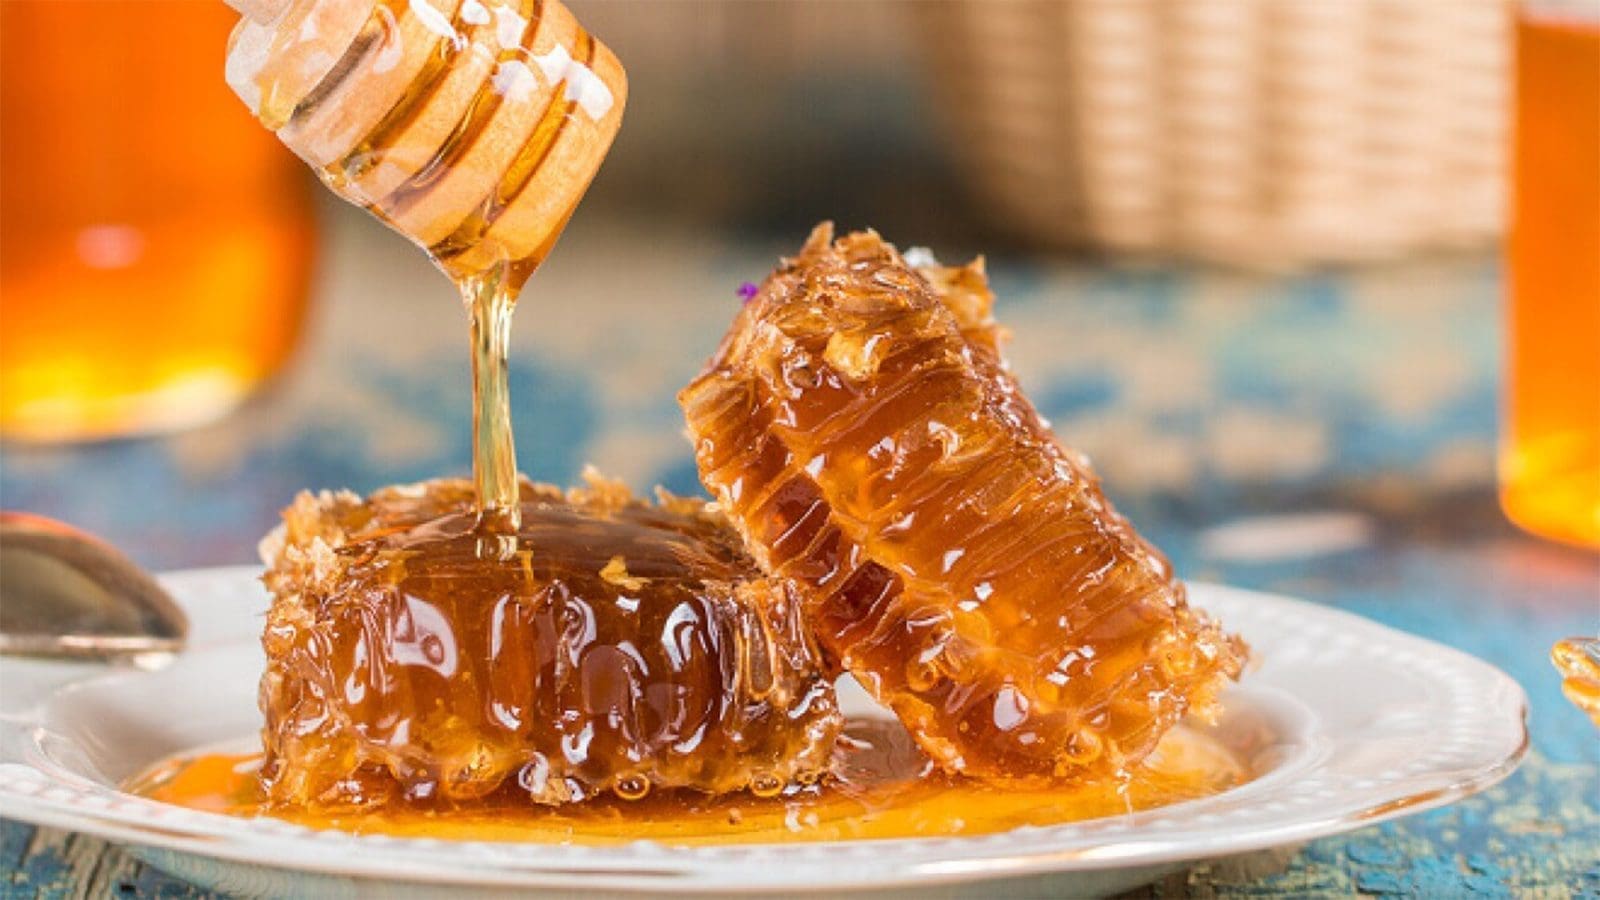 FDA food fraud testing discovers adulteration in 10% of imported honey